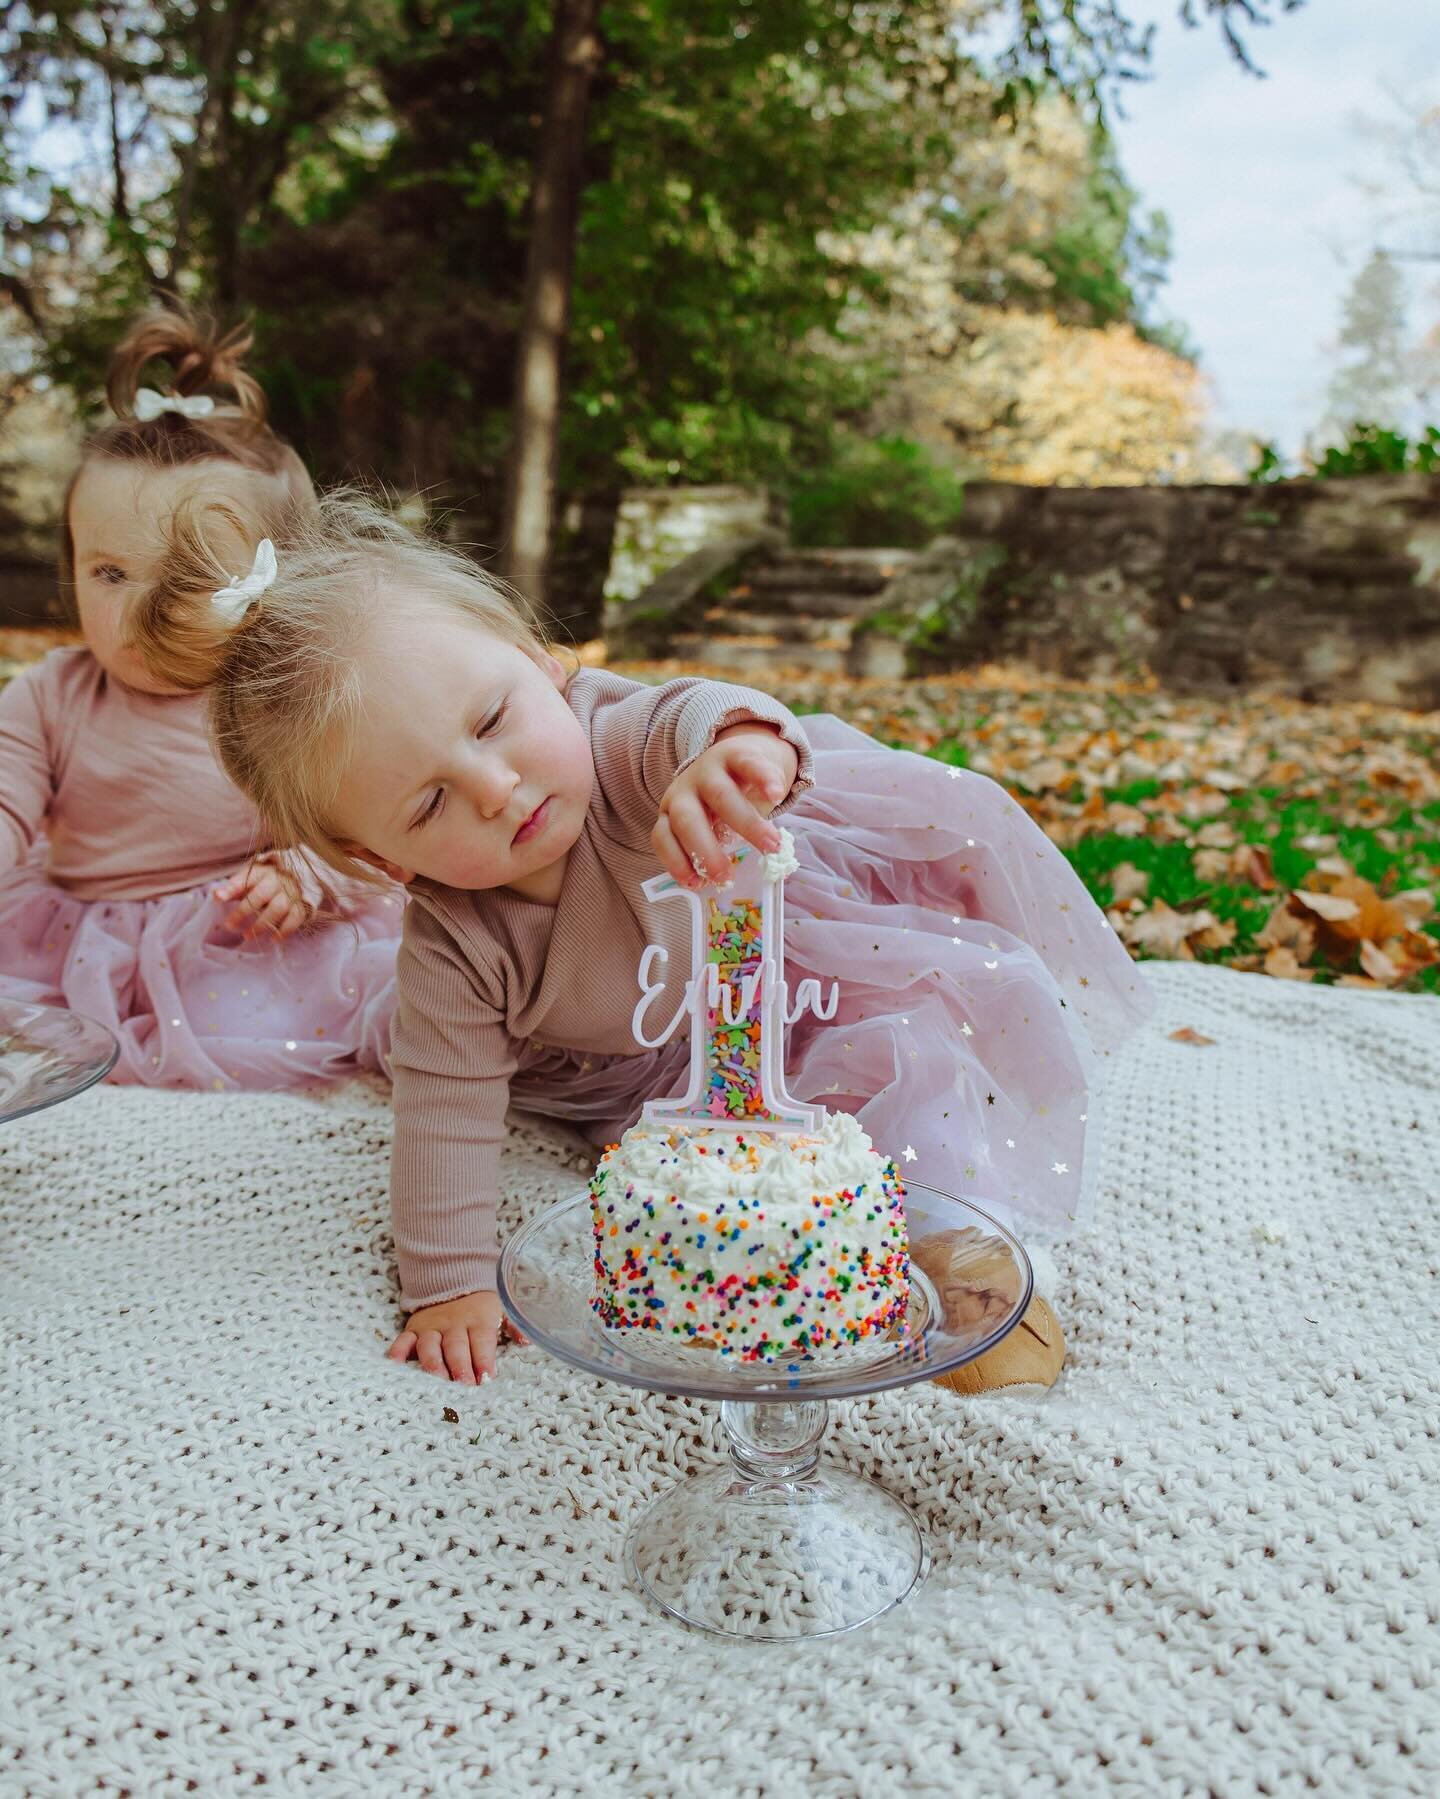 When the cake topper looks like a treat 👀
.
.
📸: @hilarydonohoephotography 
🎂: @flourandvines 
Never got around to sharing these stacked one year old cake topper for the twins that were filled with jimmies (or sprinkles for the non-Philly folks 😜